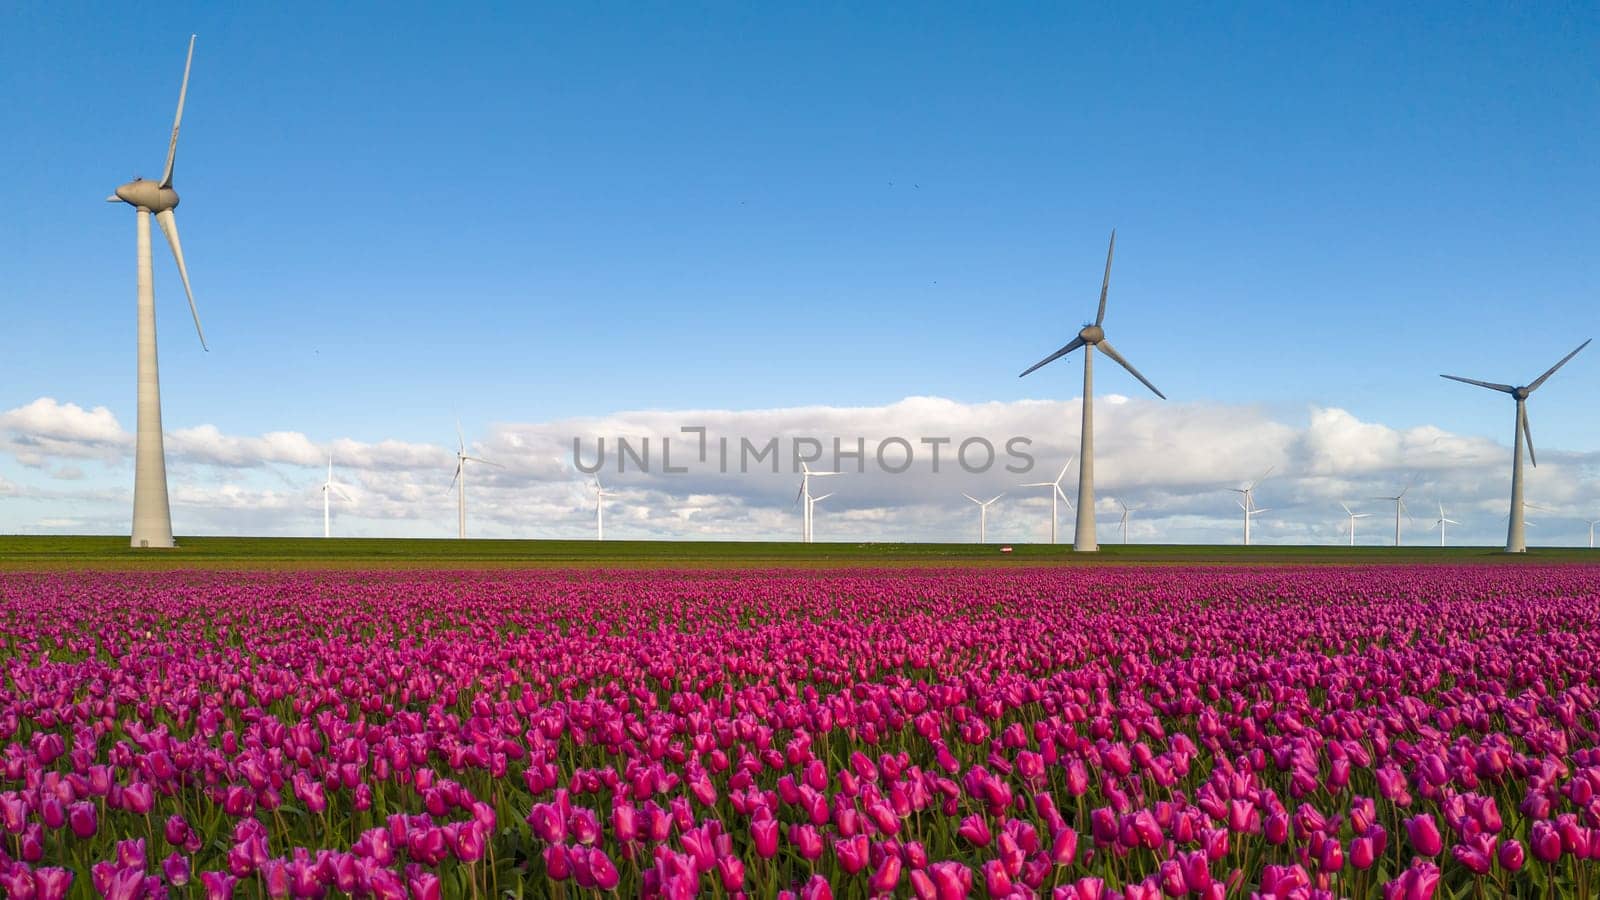 A vibrant field filled with purple flowers swaying in the wind alongside majestic windmill turbines, creating a picturesque scene of nature and technology blending harmoniously by fokkebok